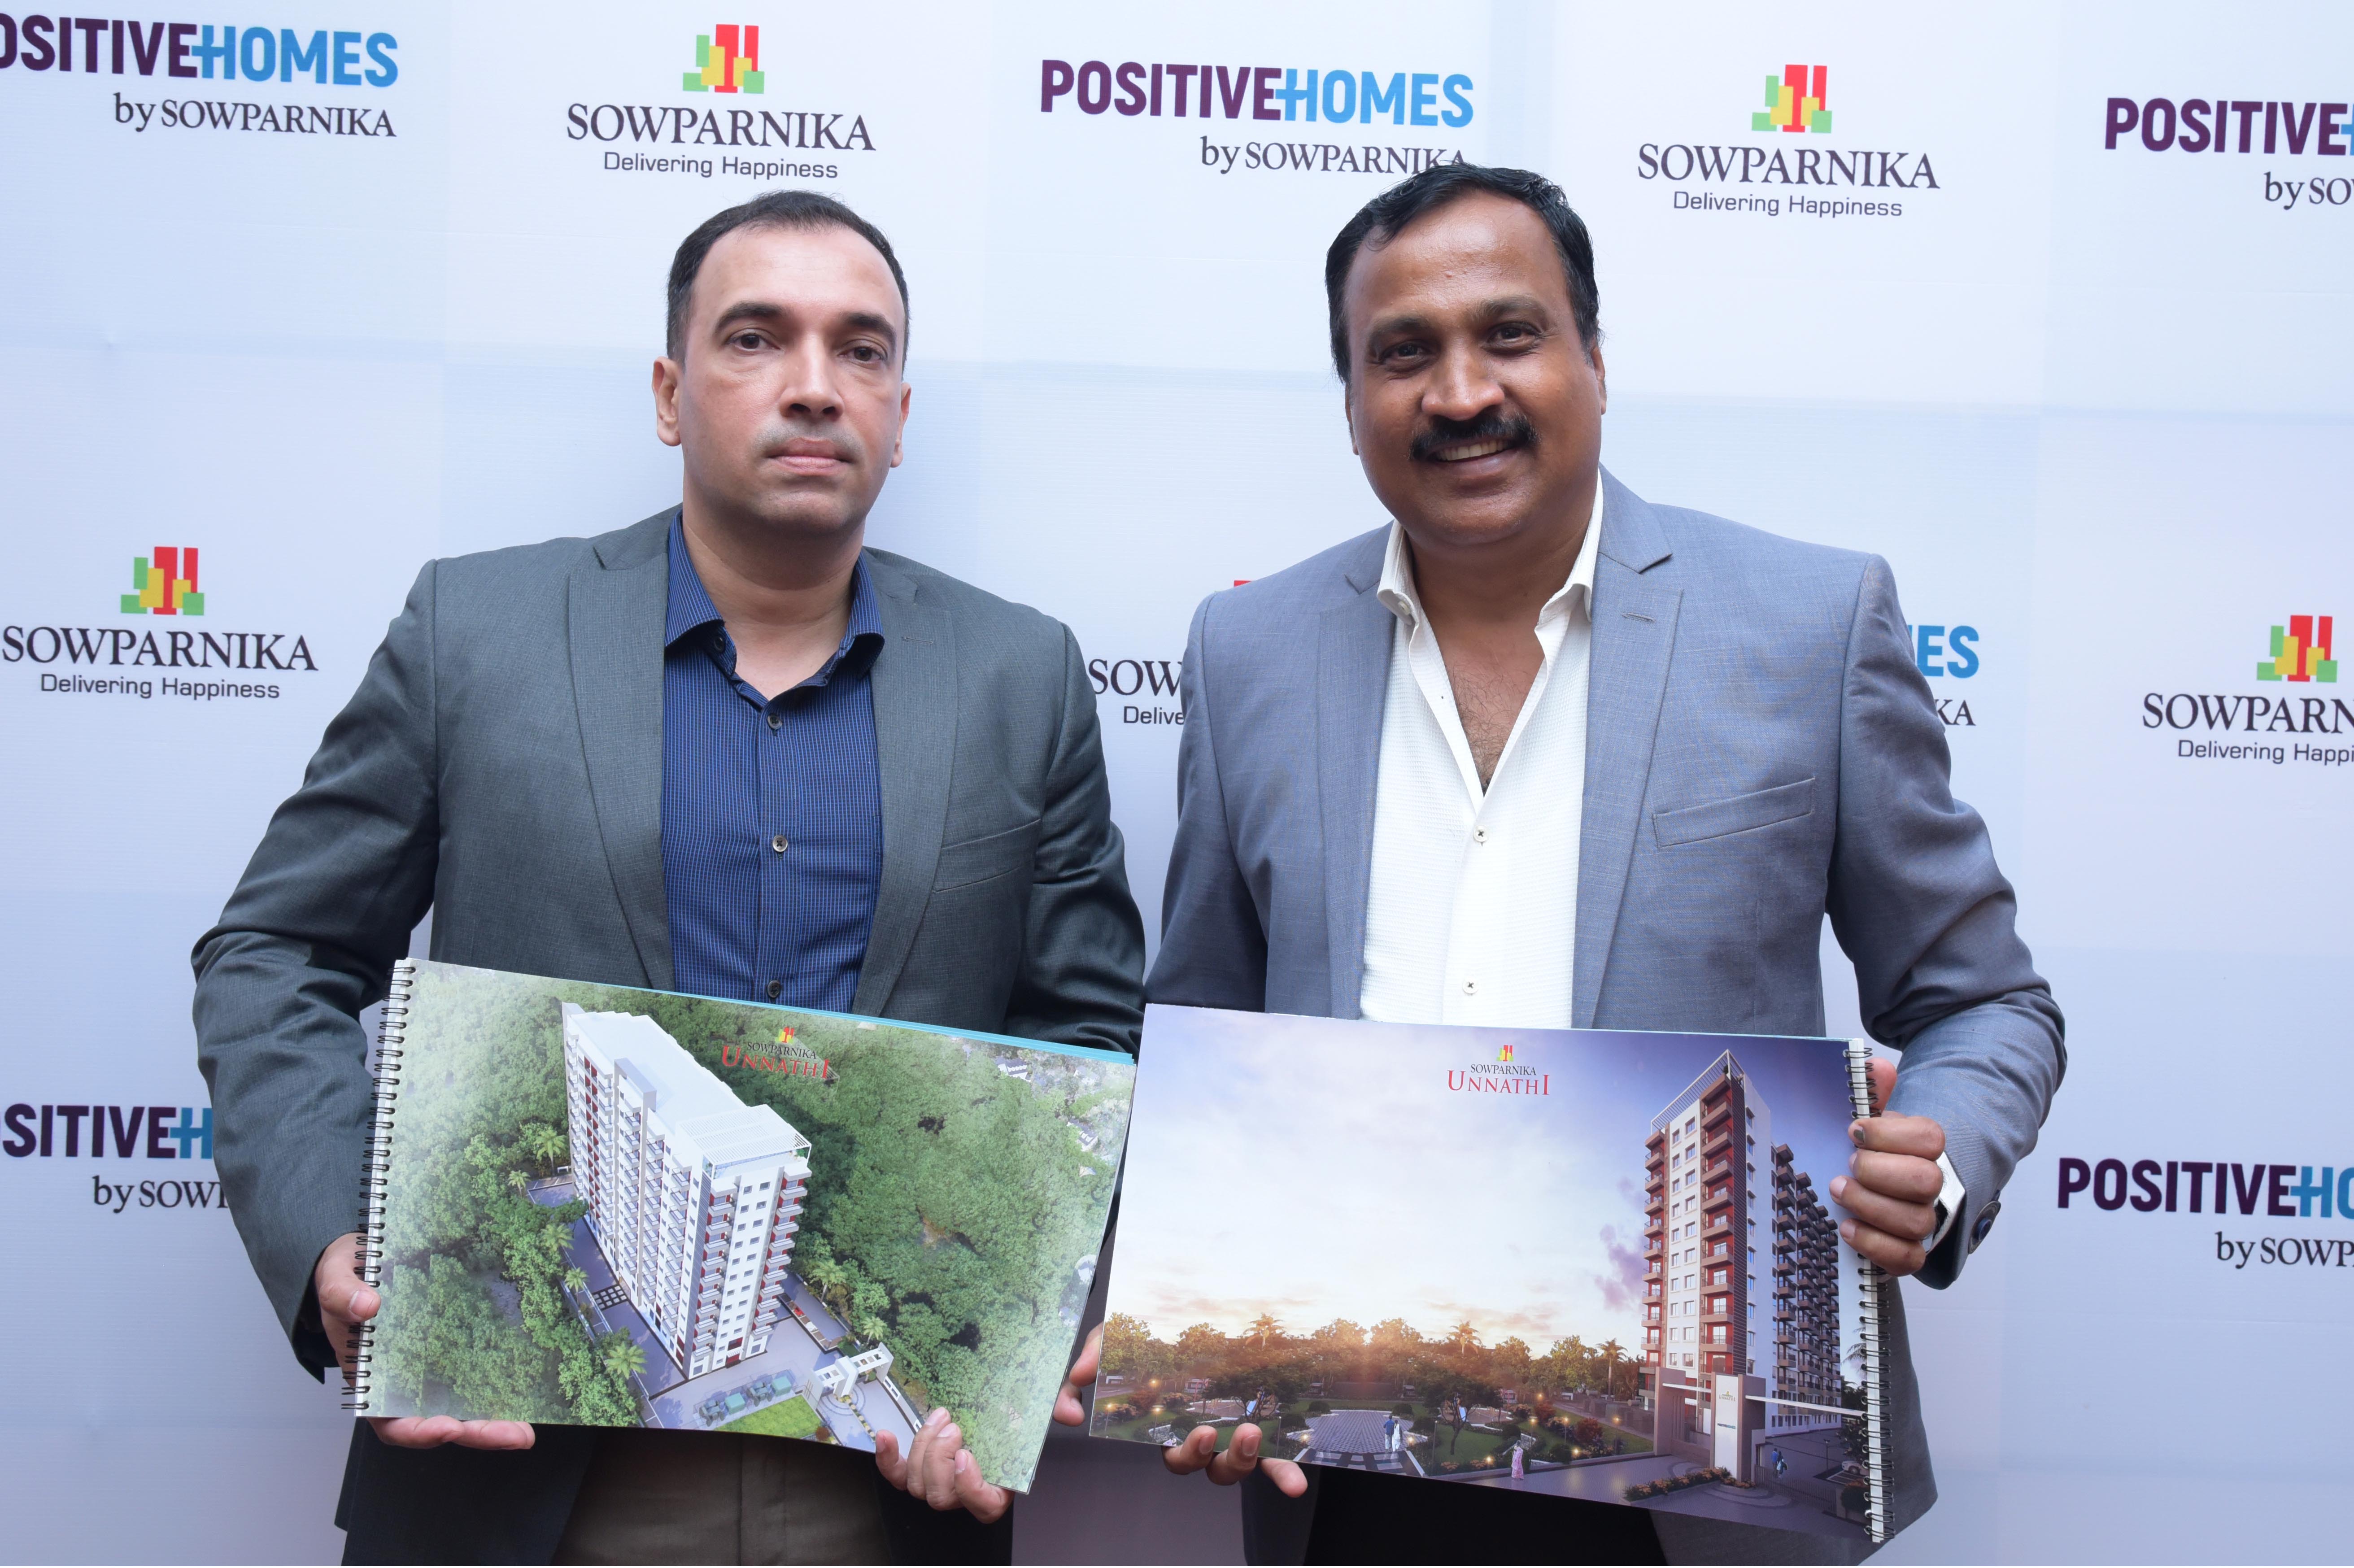 Sowparnika Projects and Infrastructure, Studio apartment in Bangalore, Bengaluru studio apartments, Affordable housing in Bangalore, New project launches in Bengaluru, India real estate news, Indian realty news, Real estate news India, Indian property market news, Investment in property, Track2Realty, Realty Plus, Realty Fact